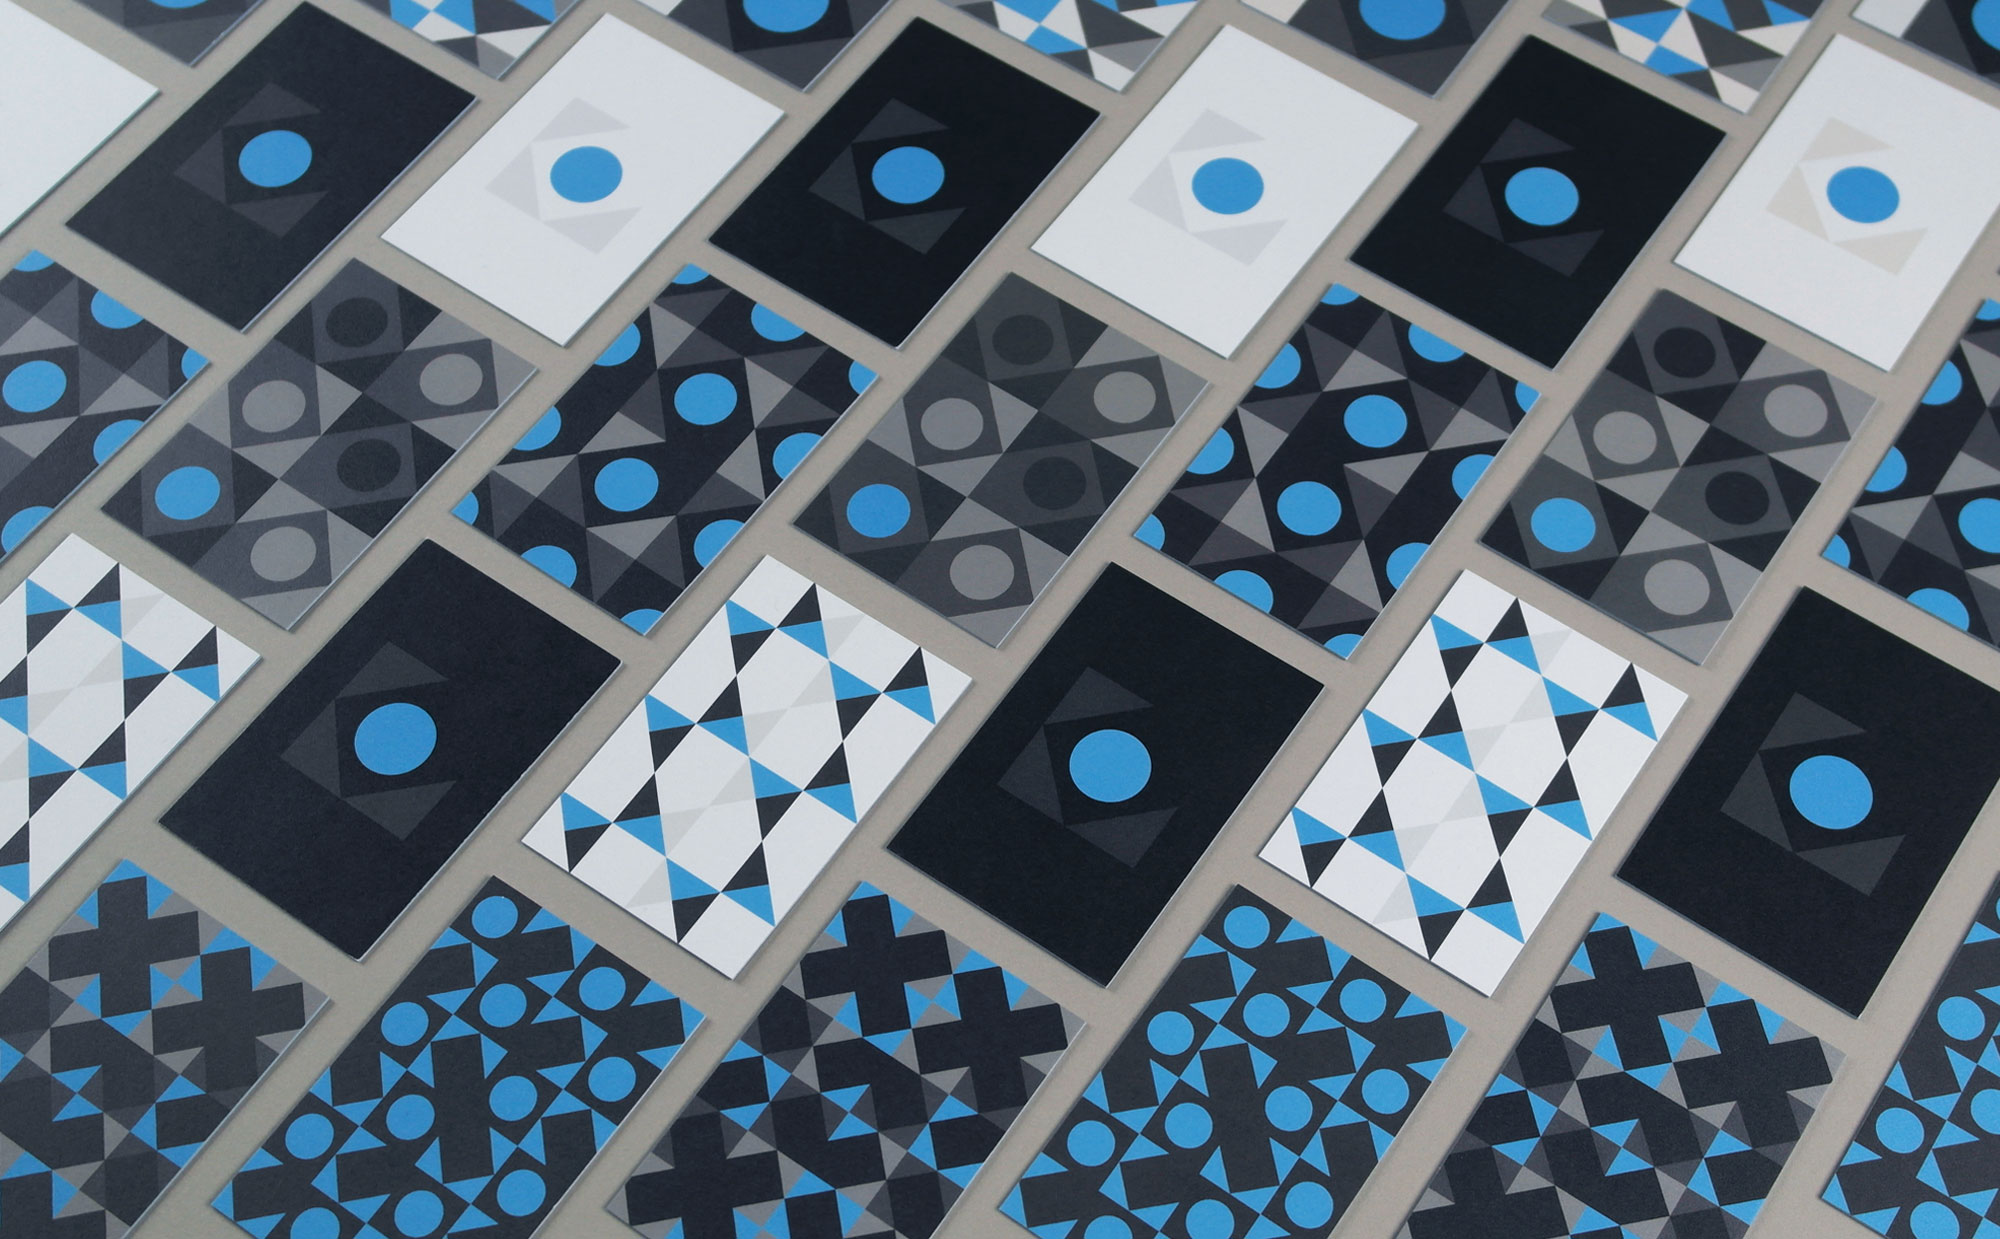 bluegiant business cards in a grid with various patterns